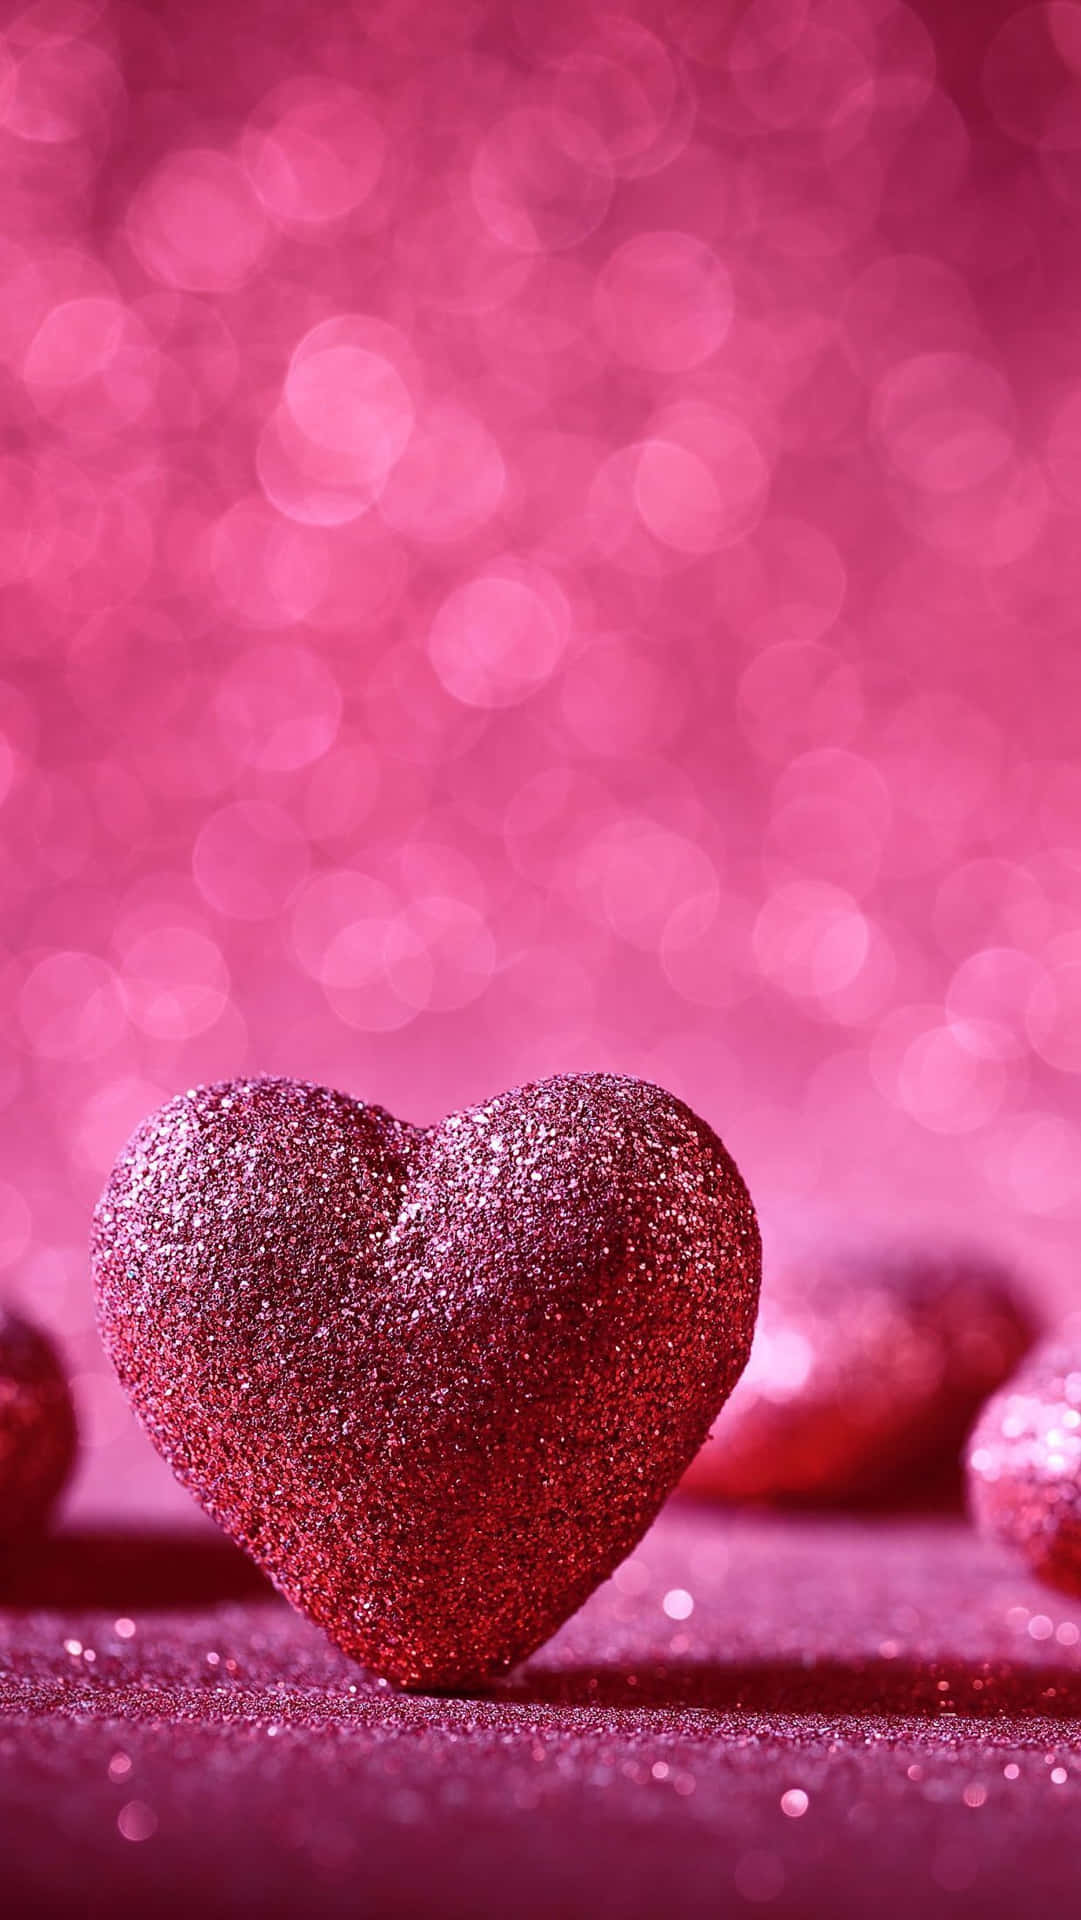 Now You Can Enjoy The Beauty of Glitter Pink Hearts Wallpaper